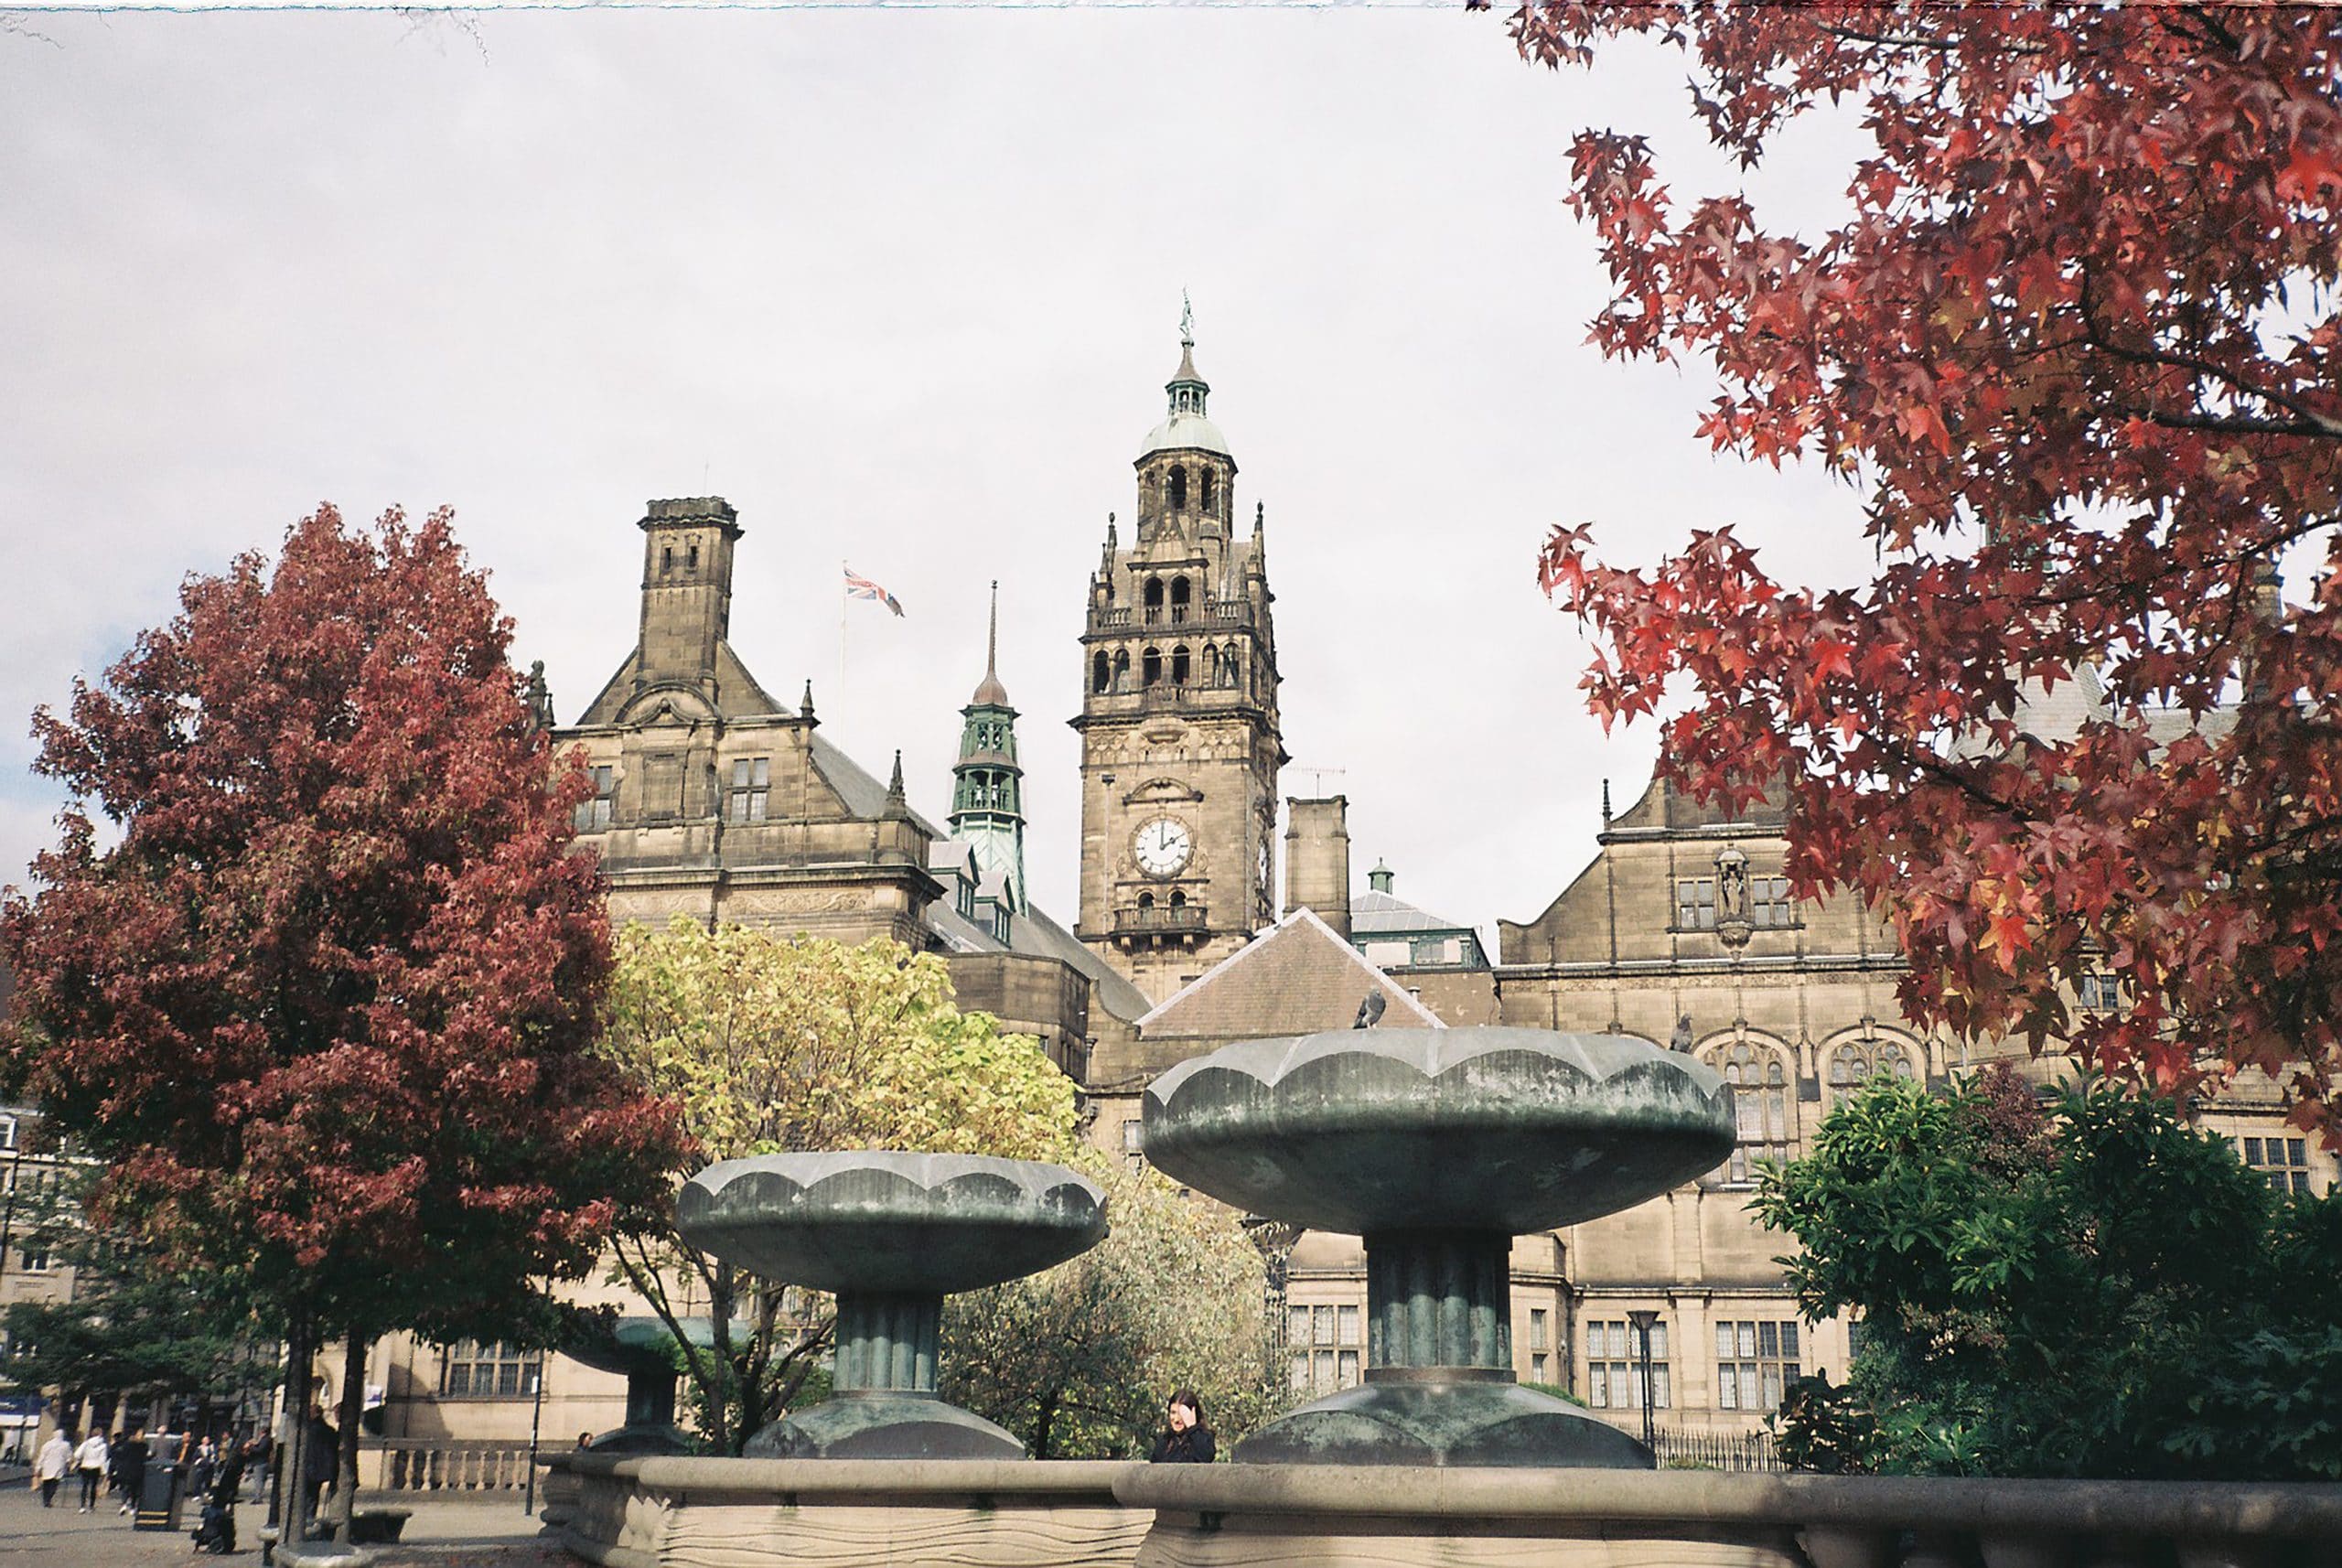 The Peace Gardens in Sheffield city centre with the Town Hall in the background, two trees and water features.